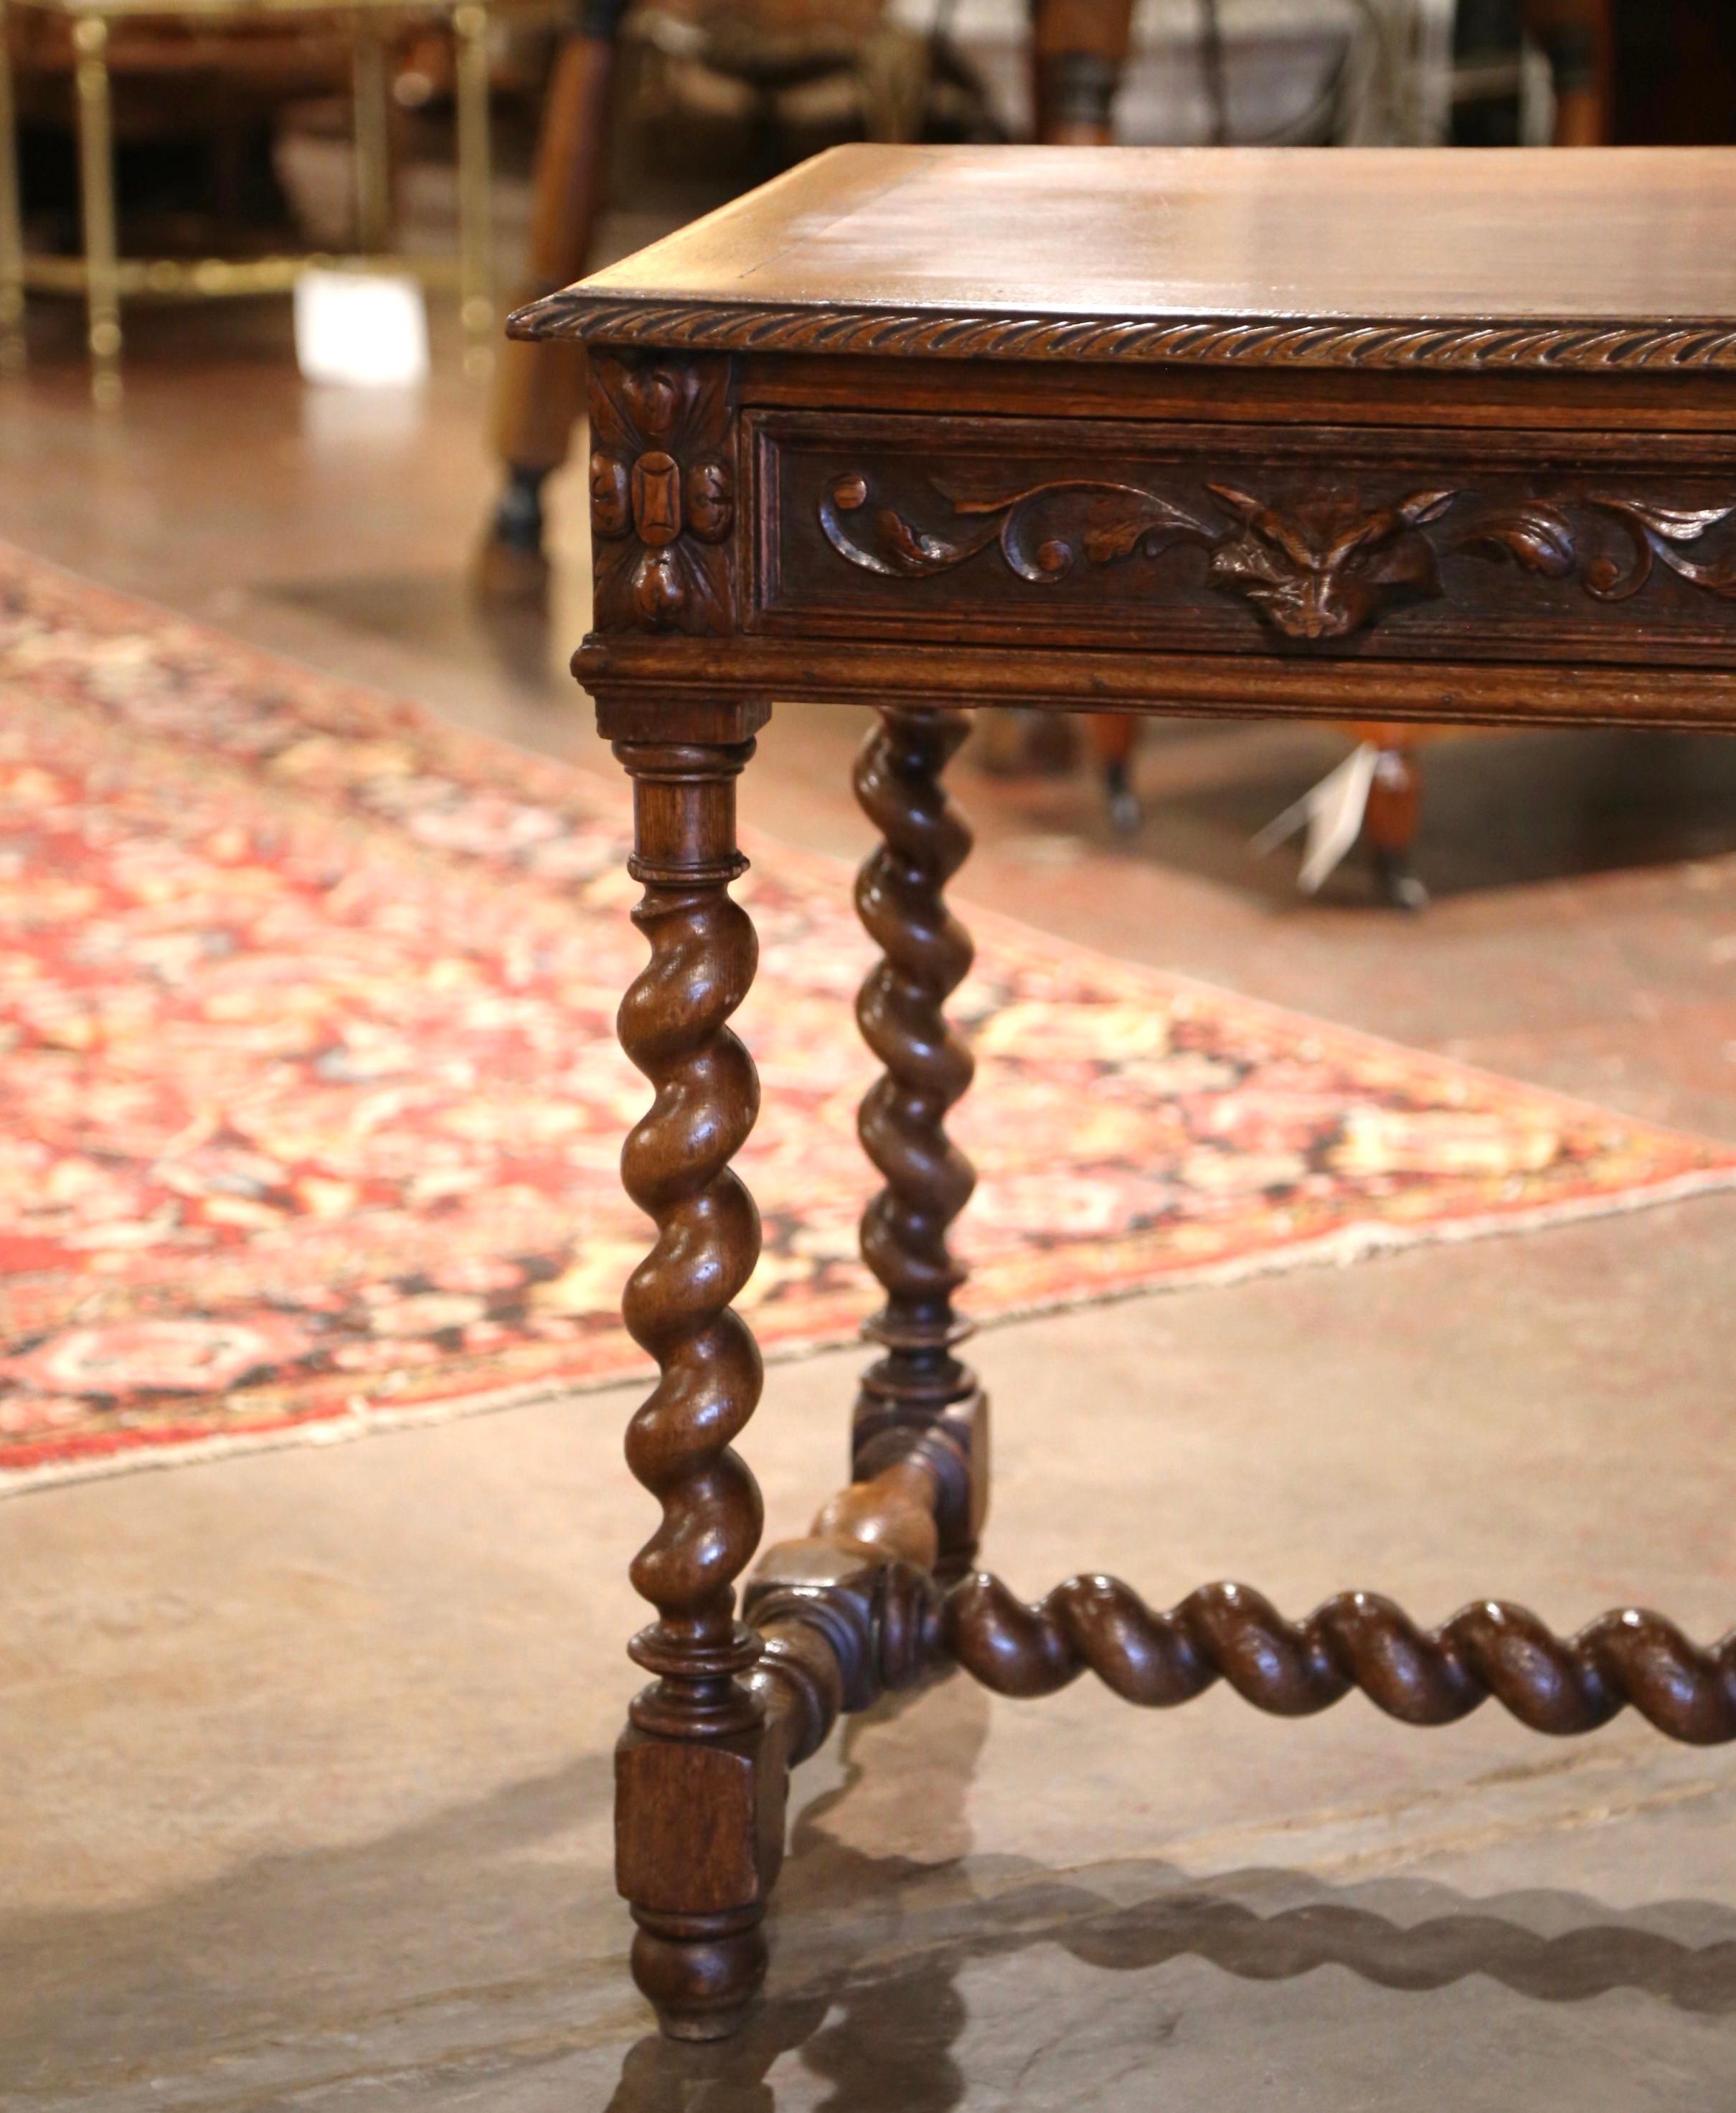 Crafted in Northern France, circa 1870, the antique writing table stands on thick carved barley twist legs ending with turned feet, and connected with an elegant stretcher at the base. The table is fitted with two drawers across the front decorated